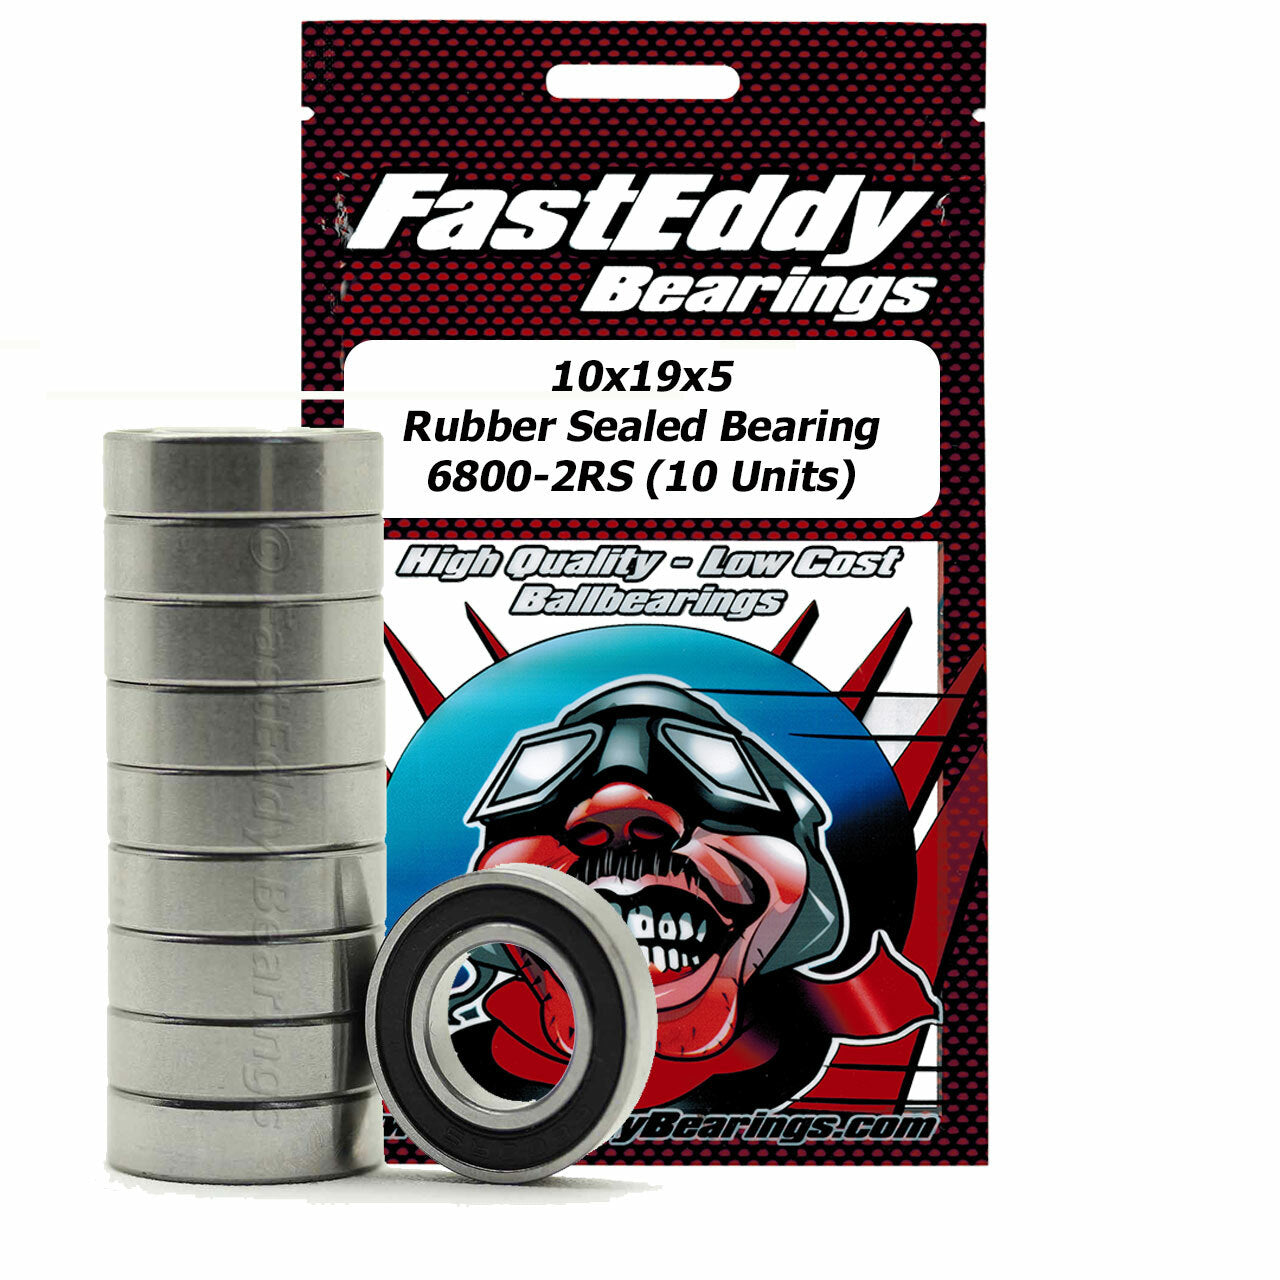 Fast Eddy 10x19x5 Rubber Sealed Bearing 6800-2RS (10 Units)